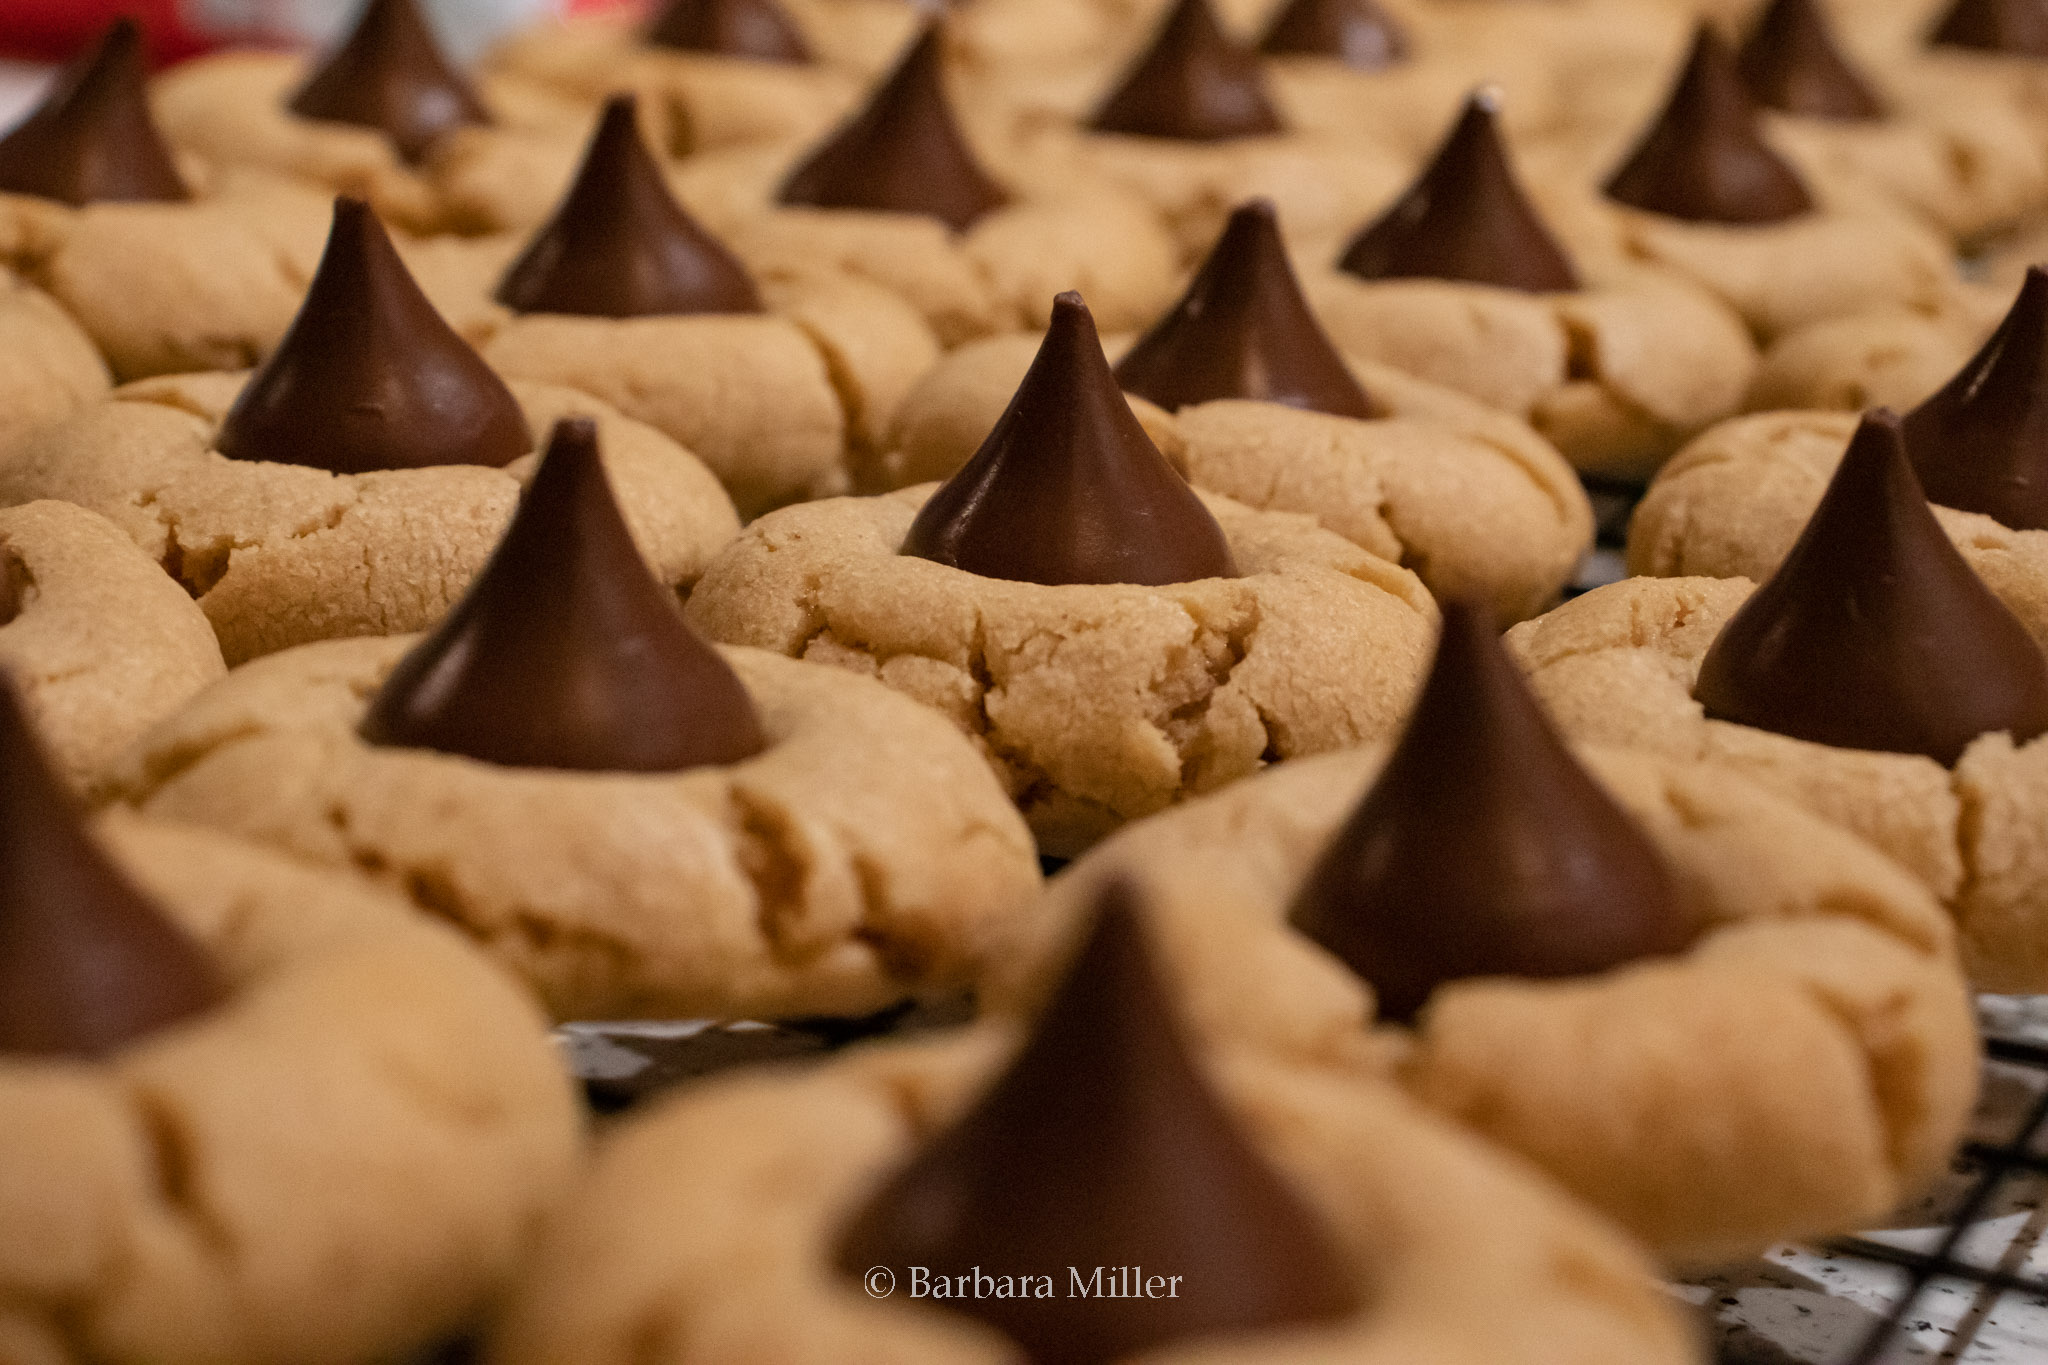 Several rows of peanut butter cookies with Hershey kisses on top.